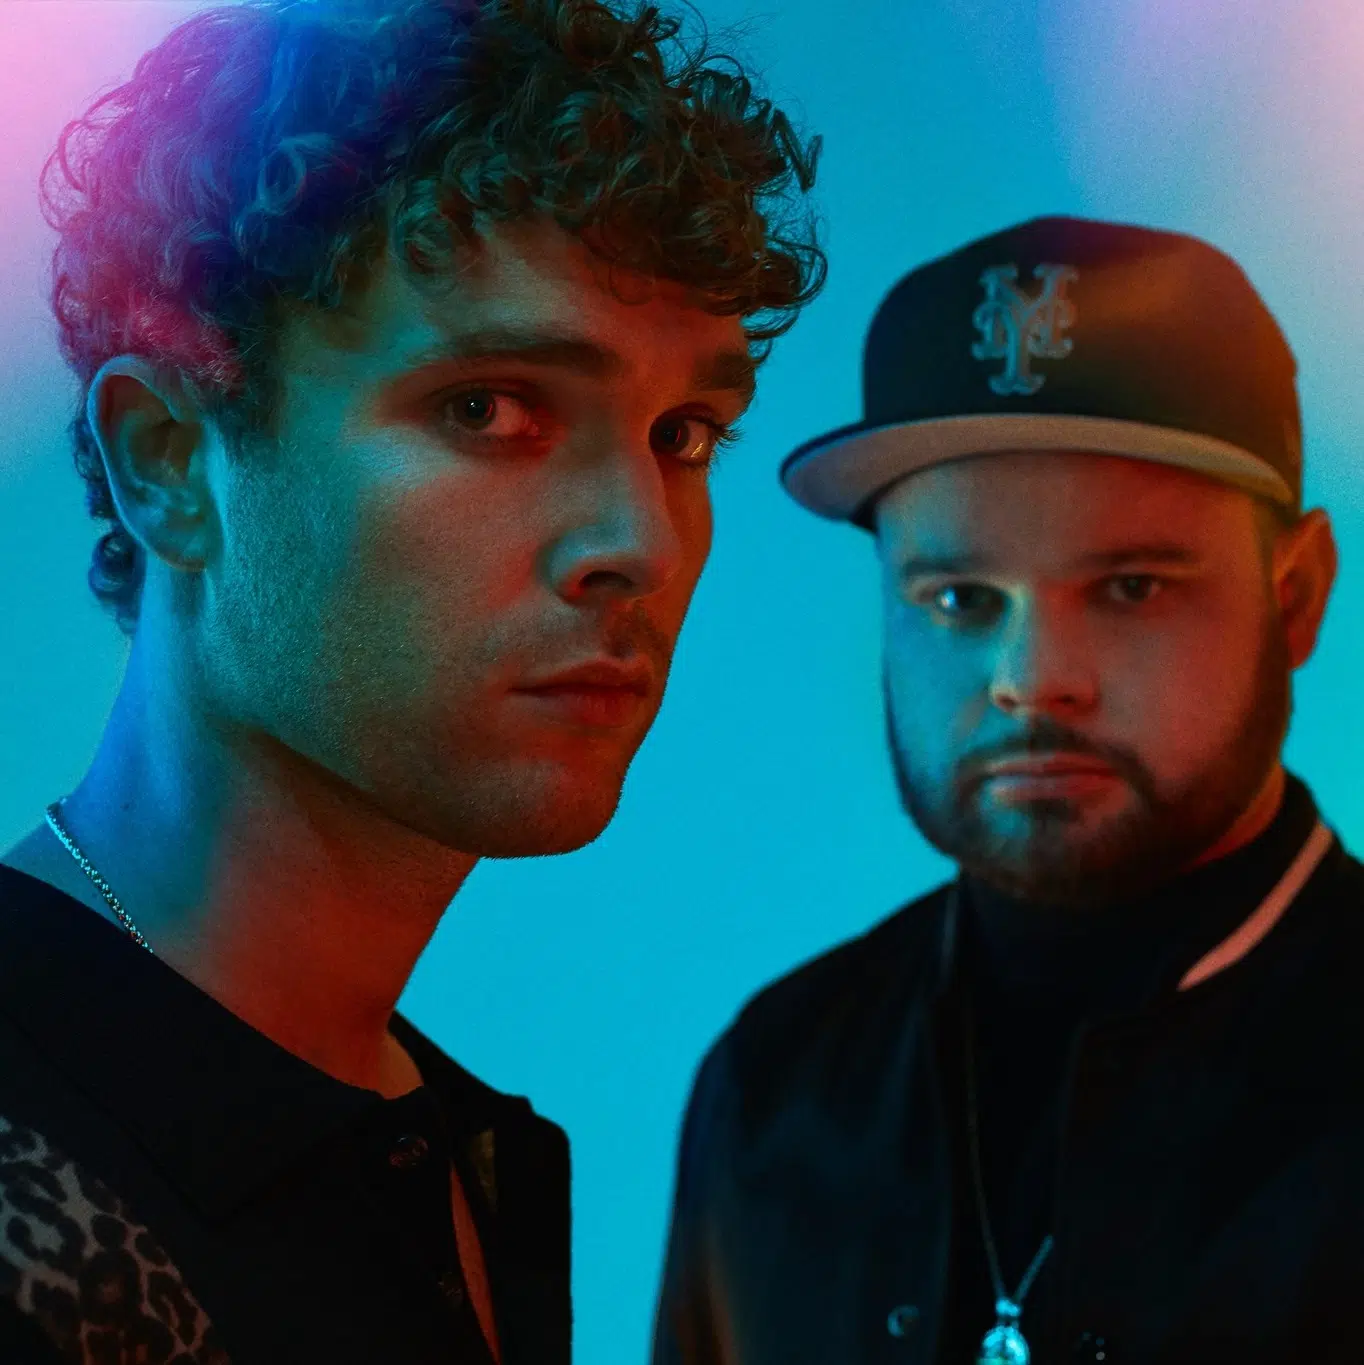 91X New Song Pick - Royal Blood, Trouble's Coming